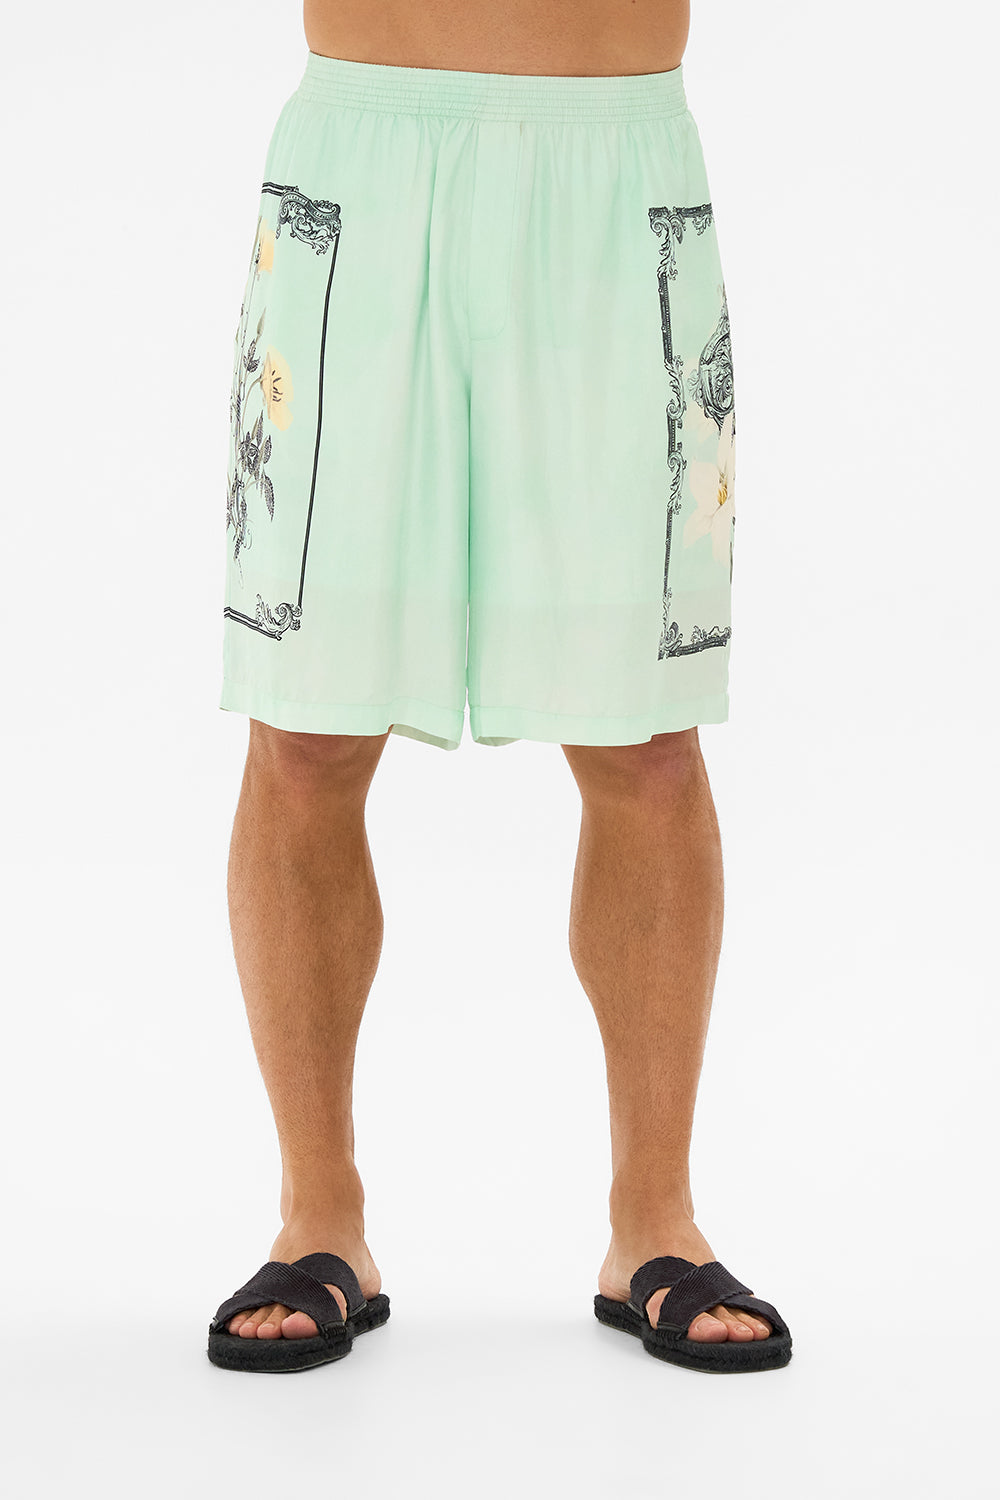 CAMILLA floral baggy mid length walk short in Petal Promise Land